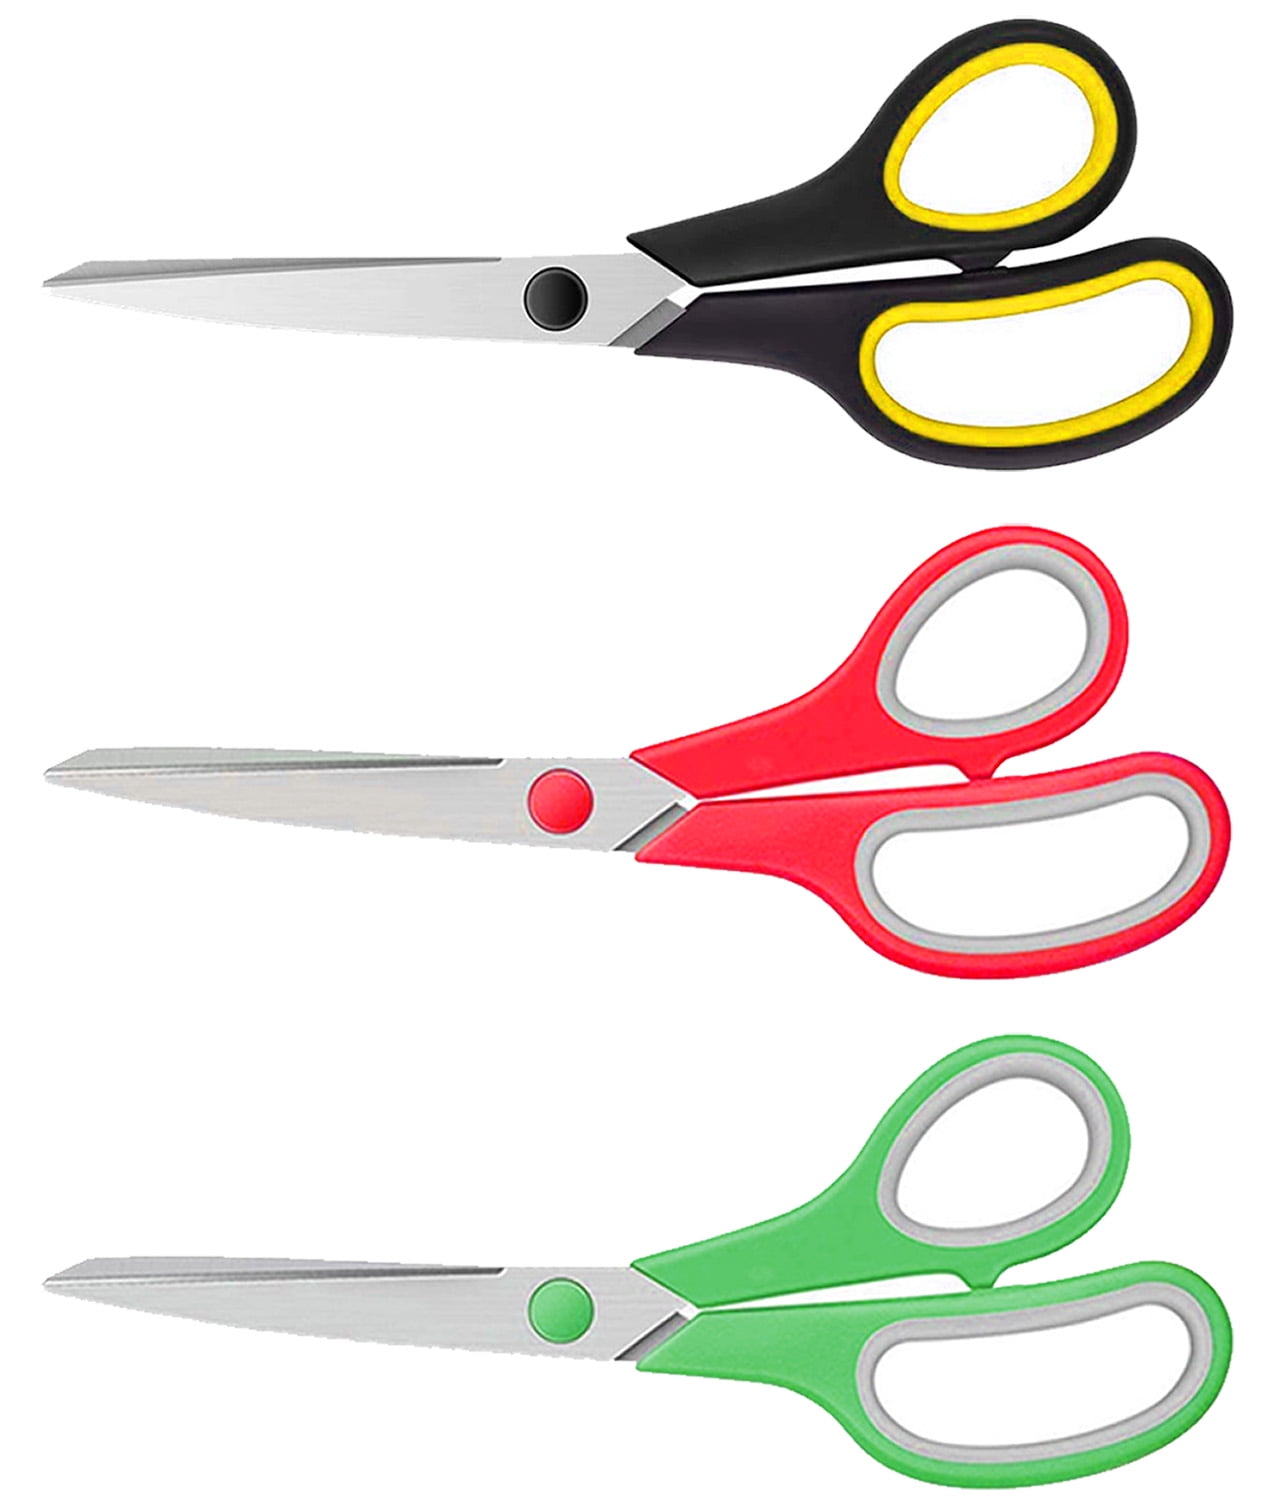 Scissors Set of 5-Pack, 8 Scissors All Purpose Comfort-Grip Handles Sharp Scissors for Office Home School Craft Sewing Fabric Supplies, High/Middle